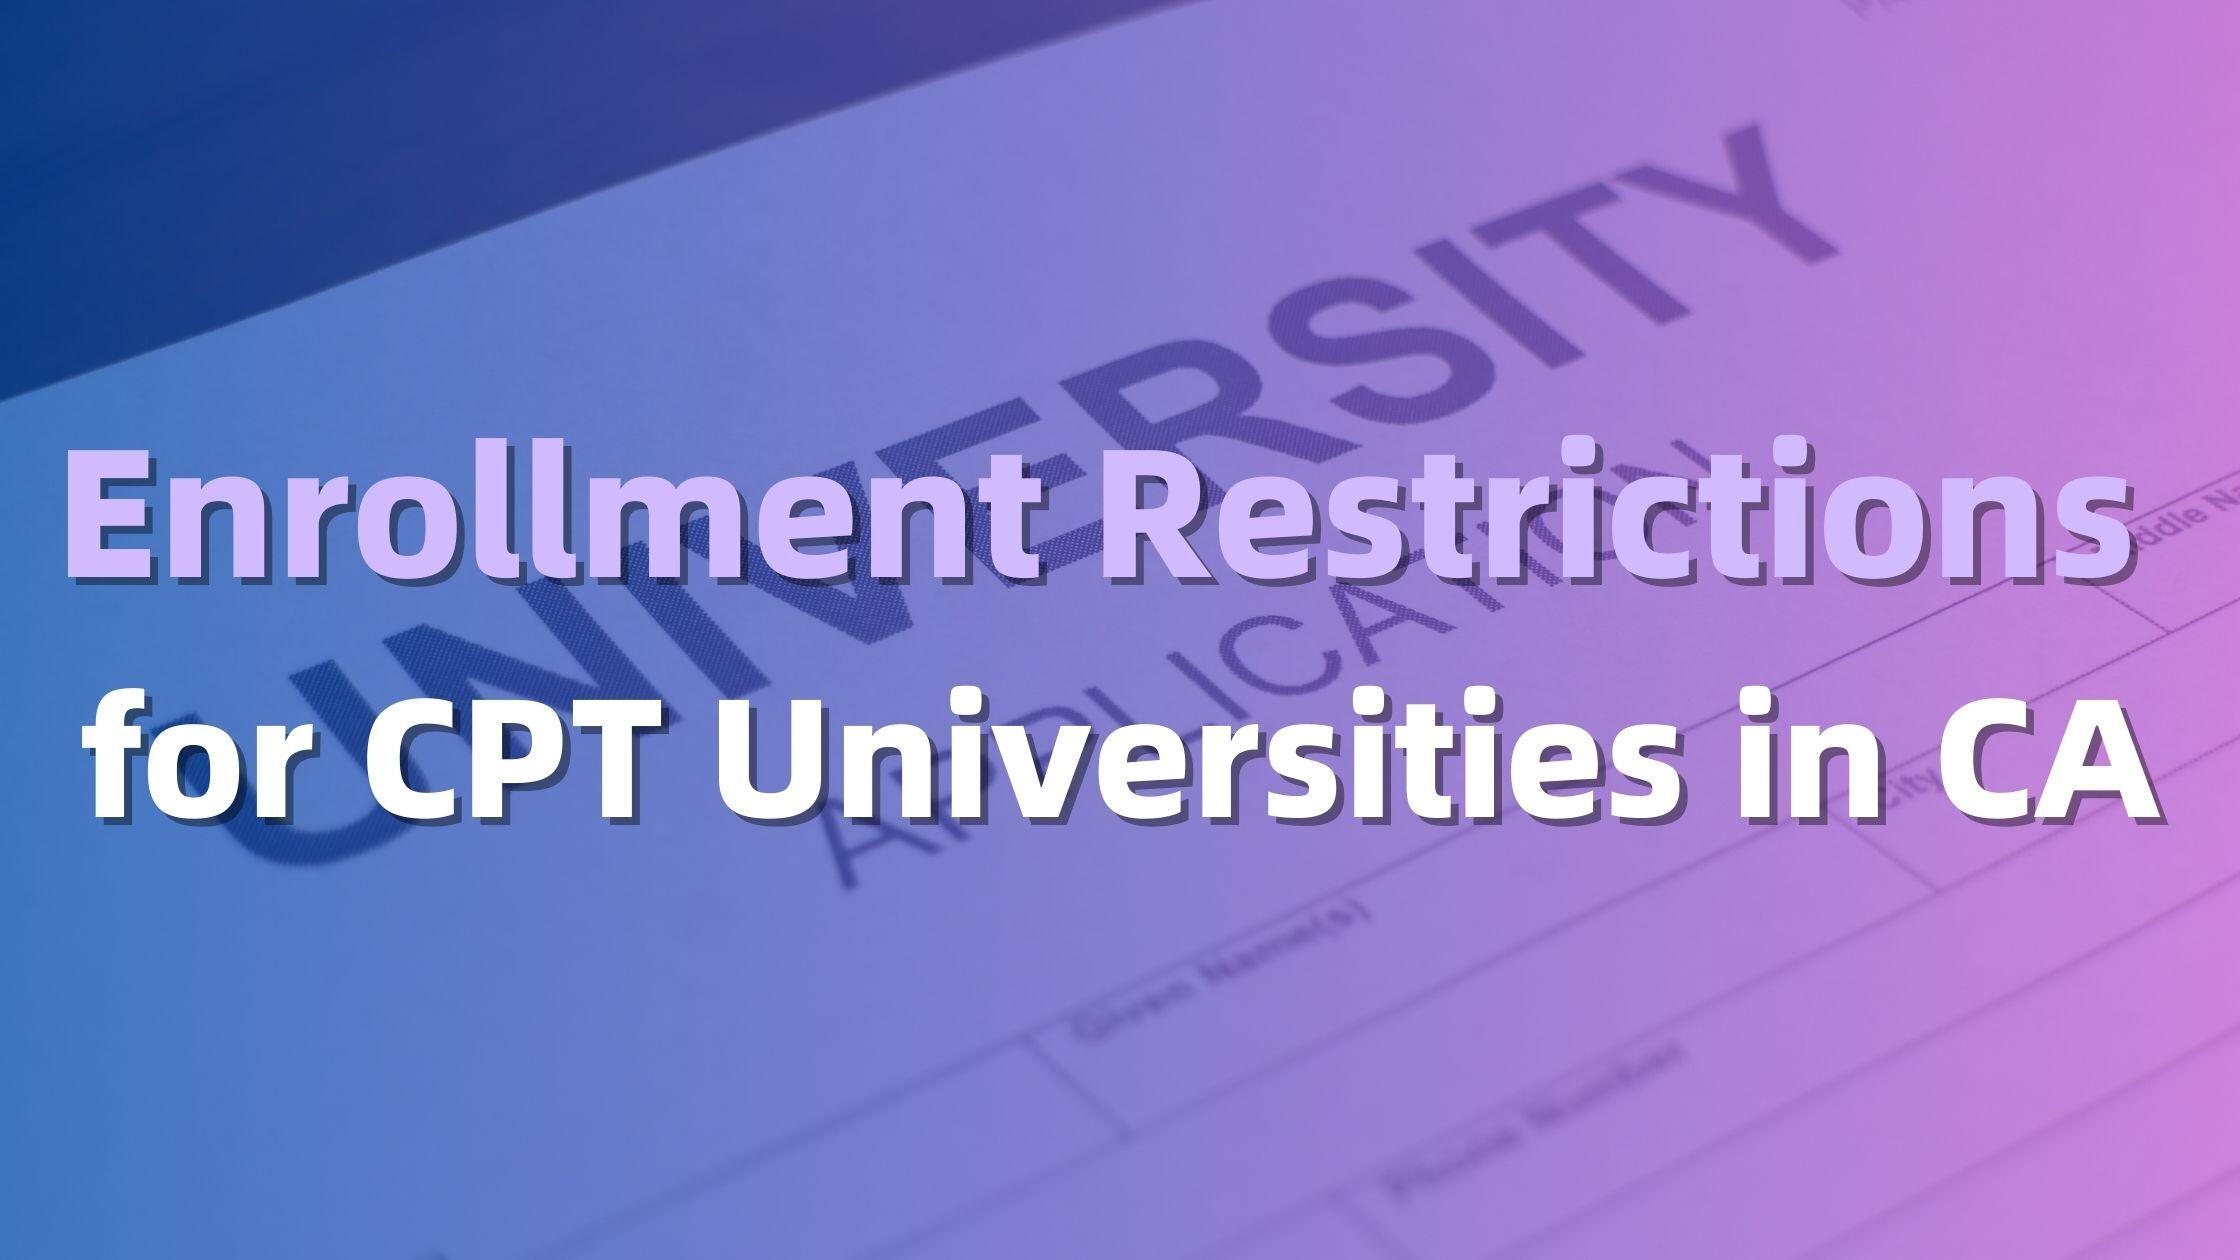 Enrollment restrictions for Day 1 CPT Universities in California